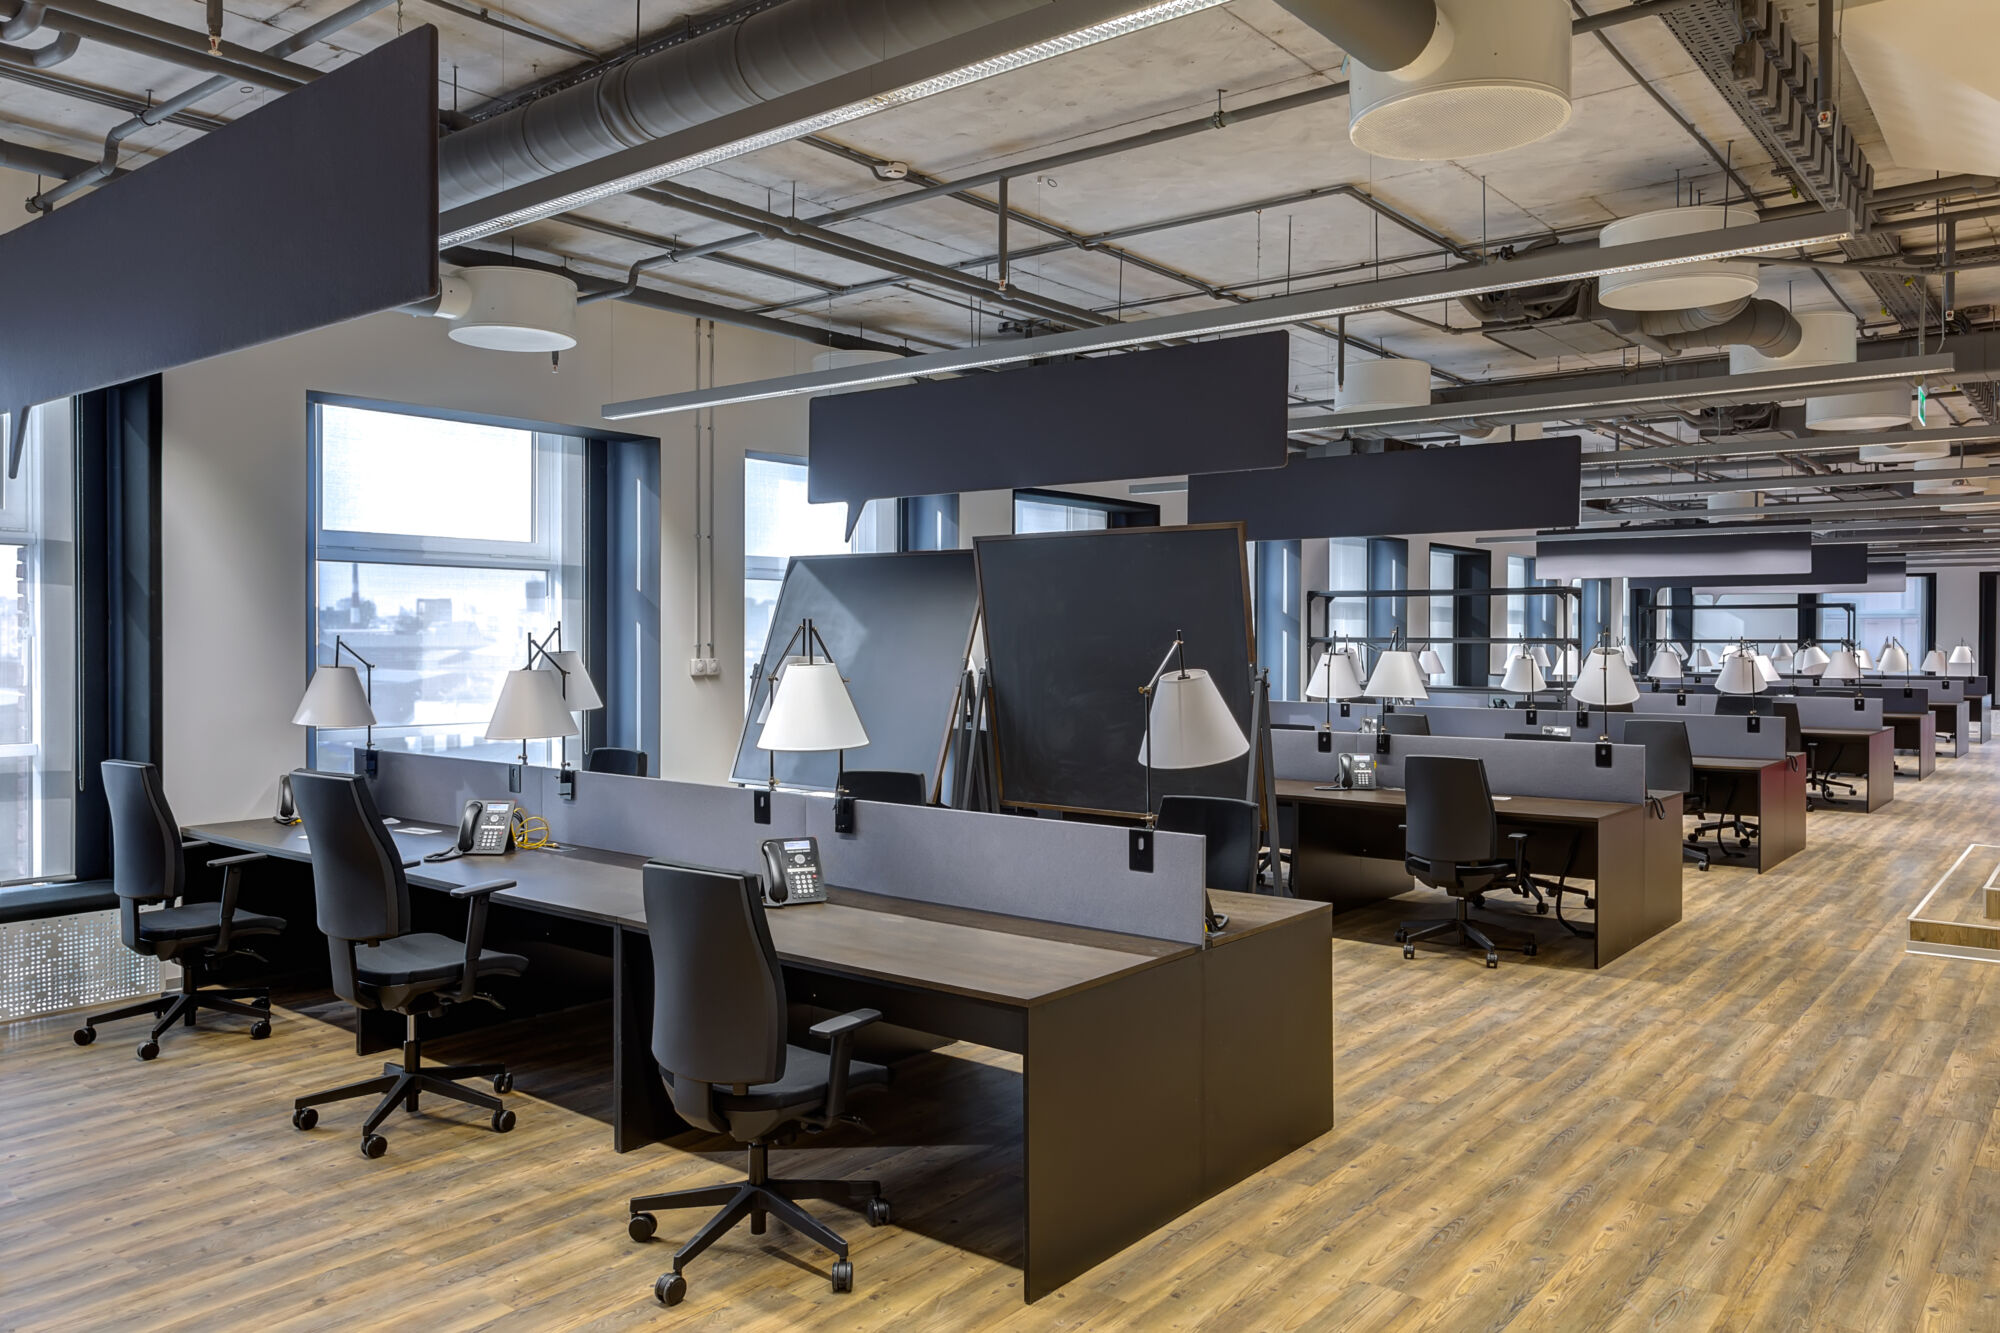 Demountable Walls from Collaborative Office Interiors